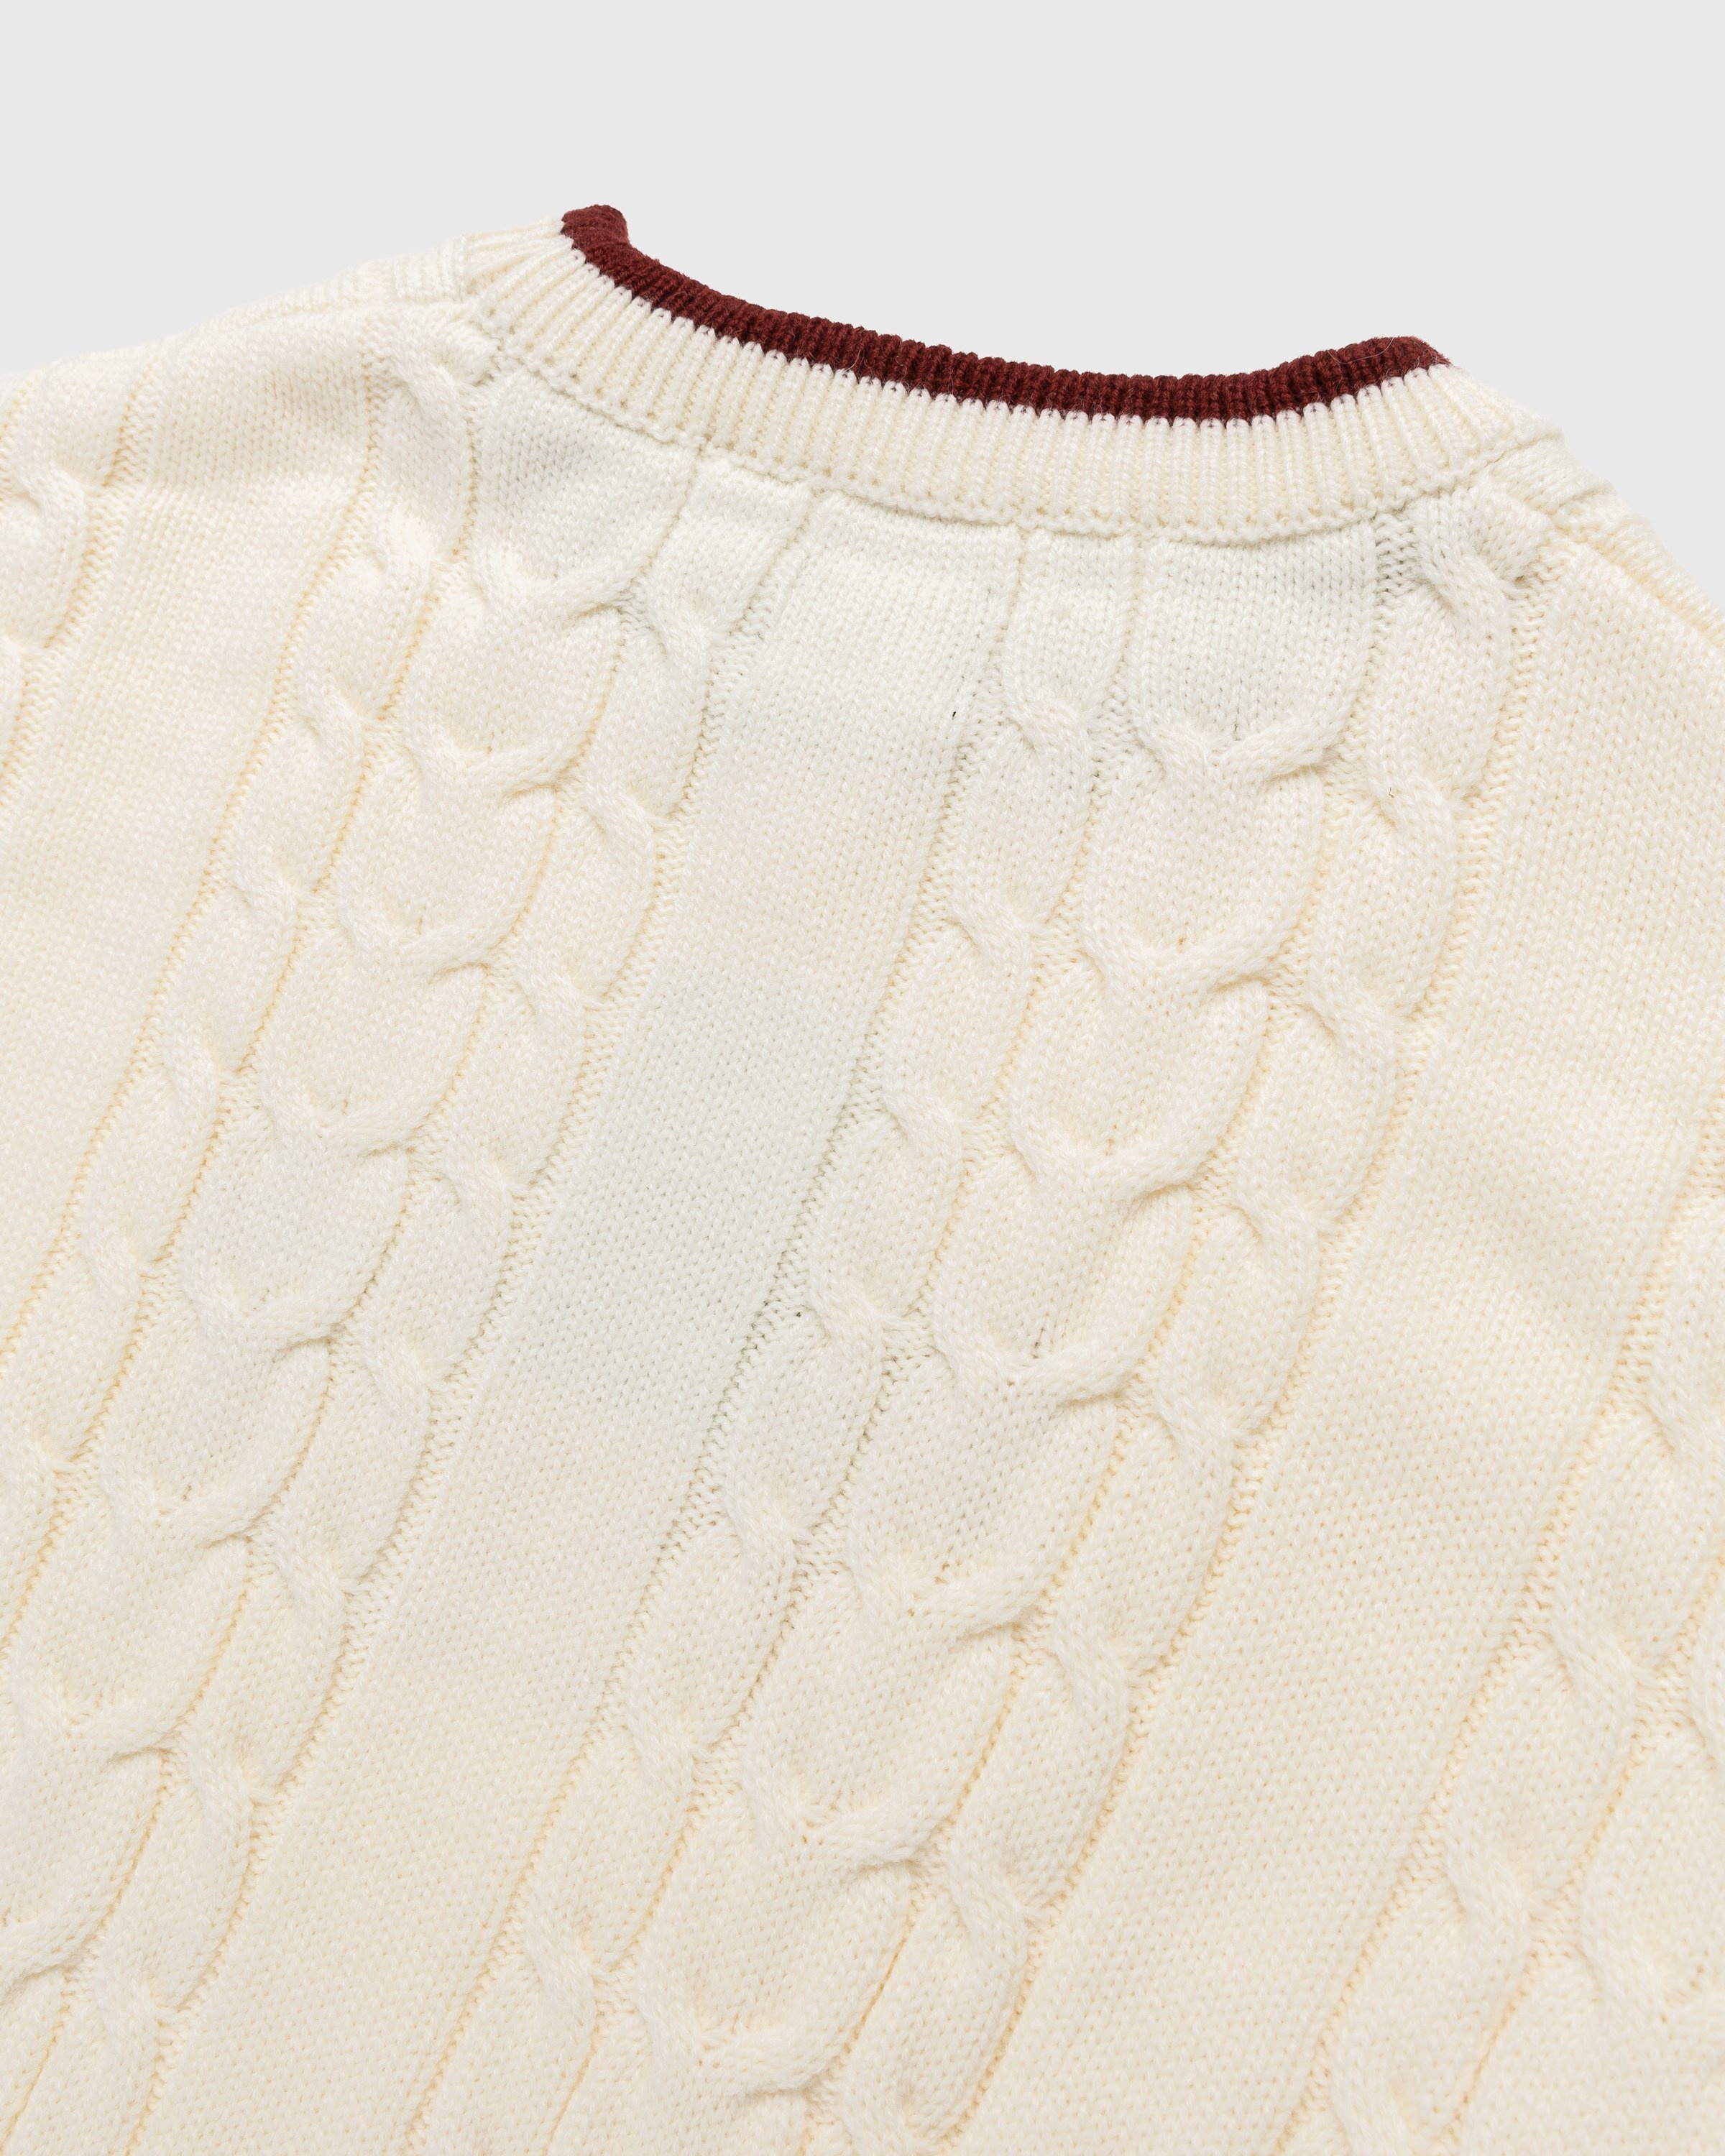 Patta – Premium Cable Knitted Sweater Vanilla Ice - Knitwear - White - Image 4